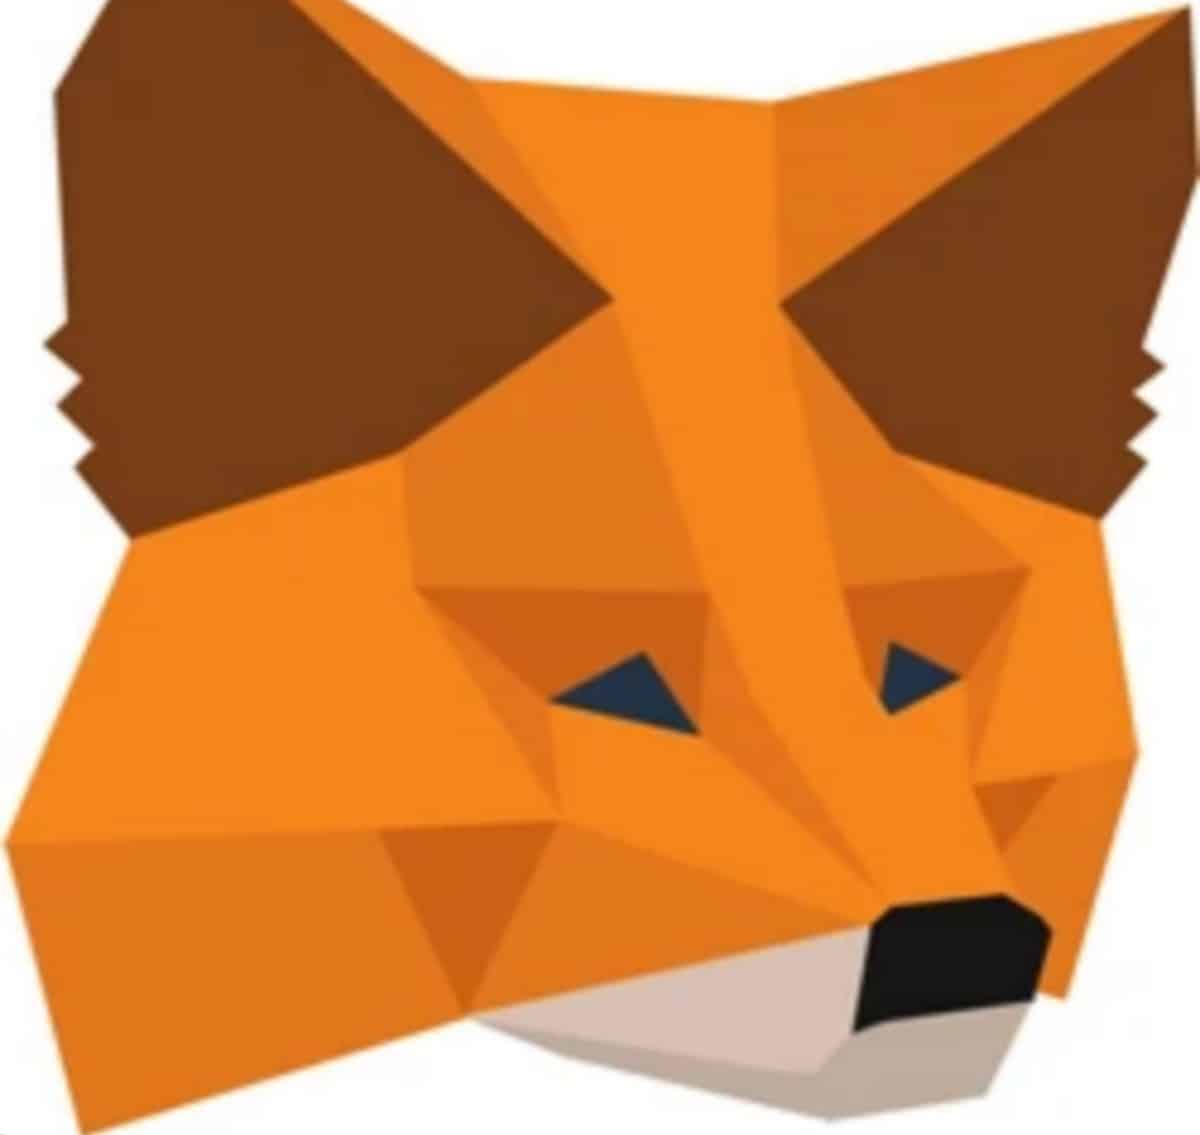 Metamask Launches Mobile Swap Service